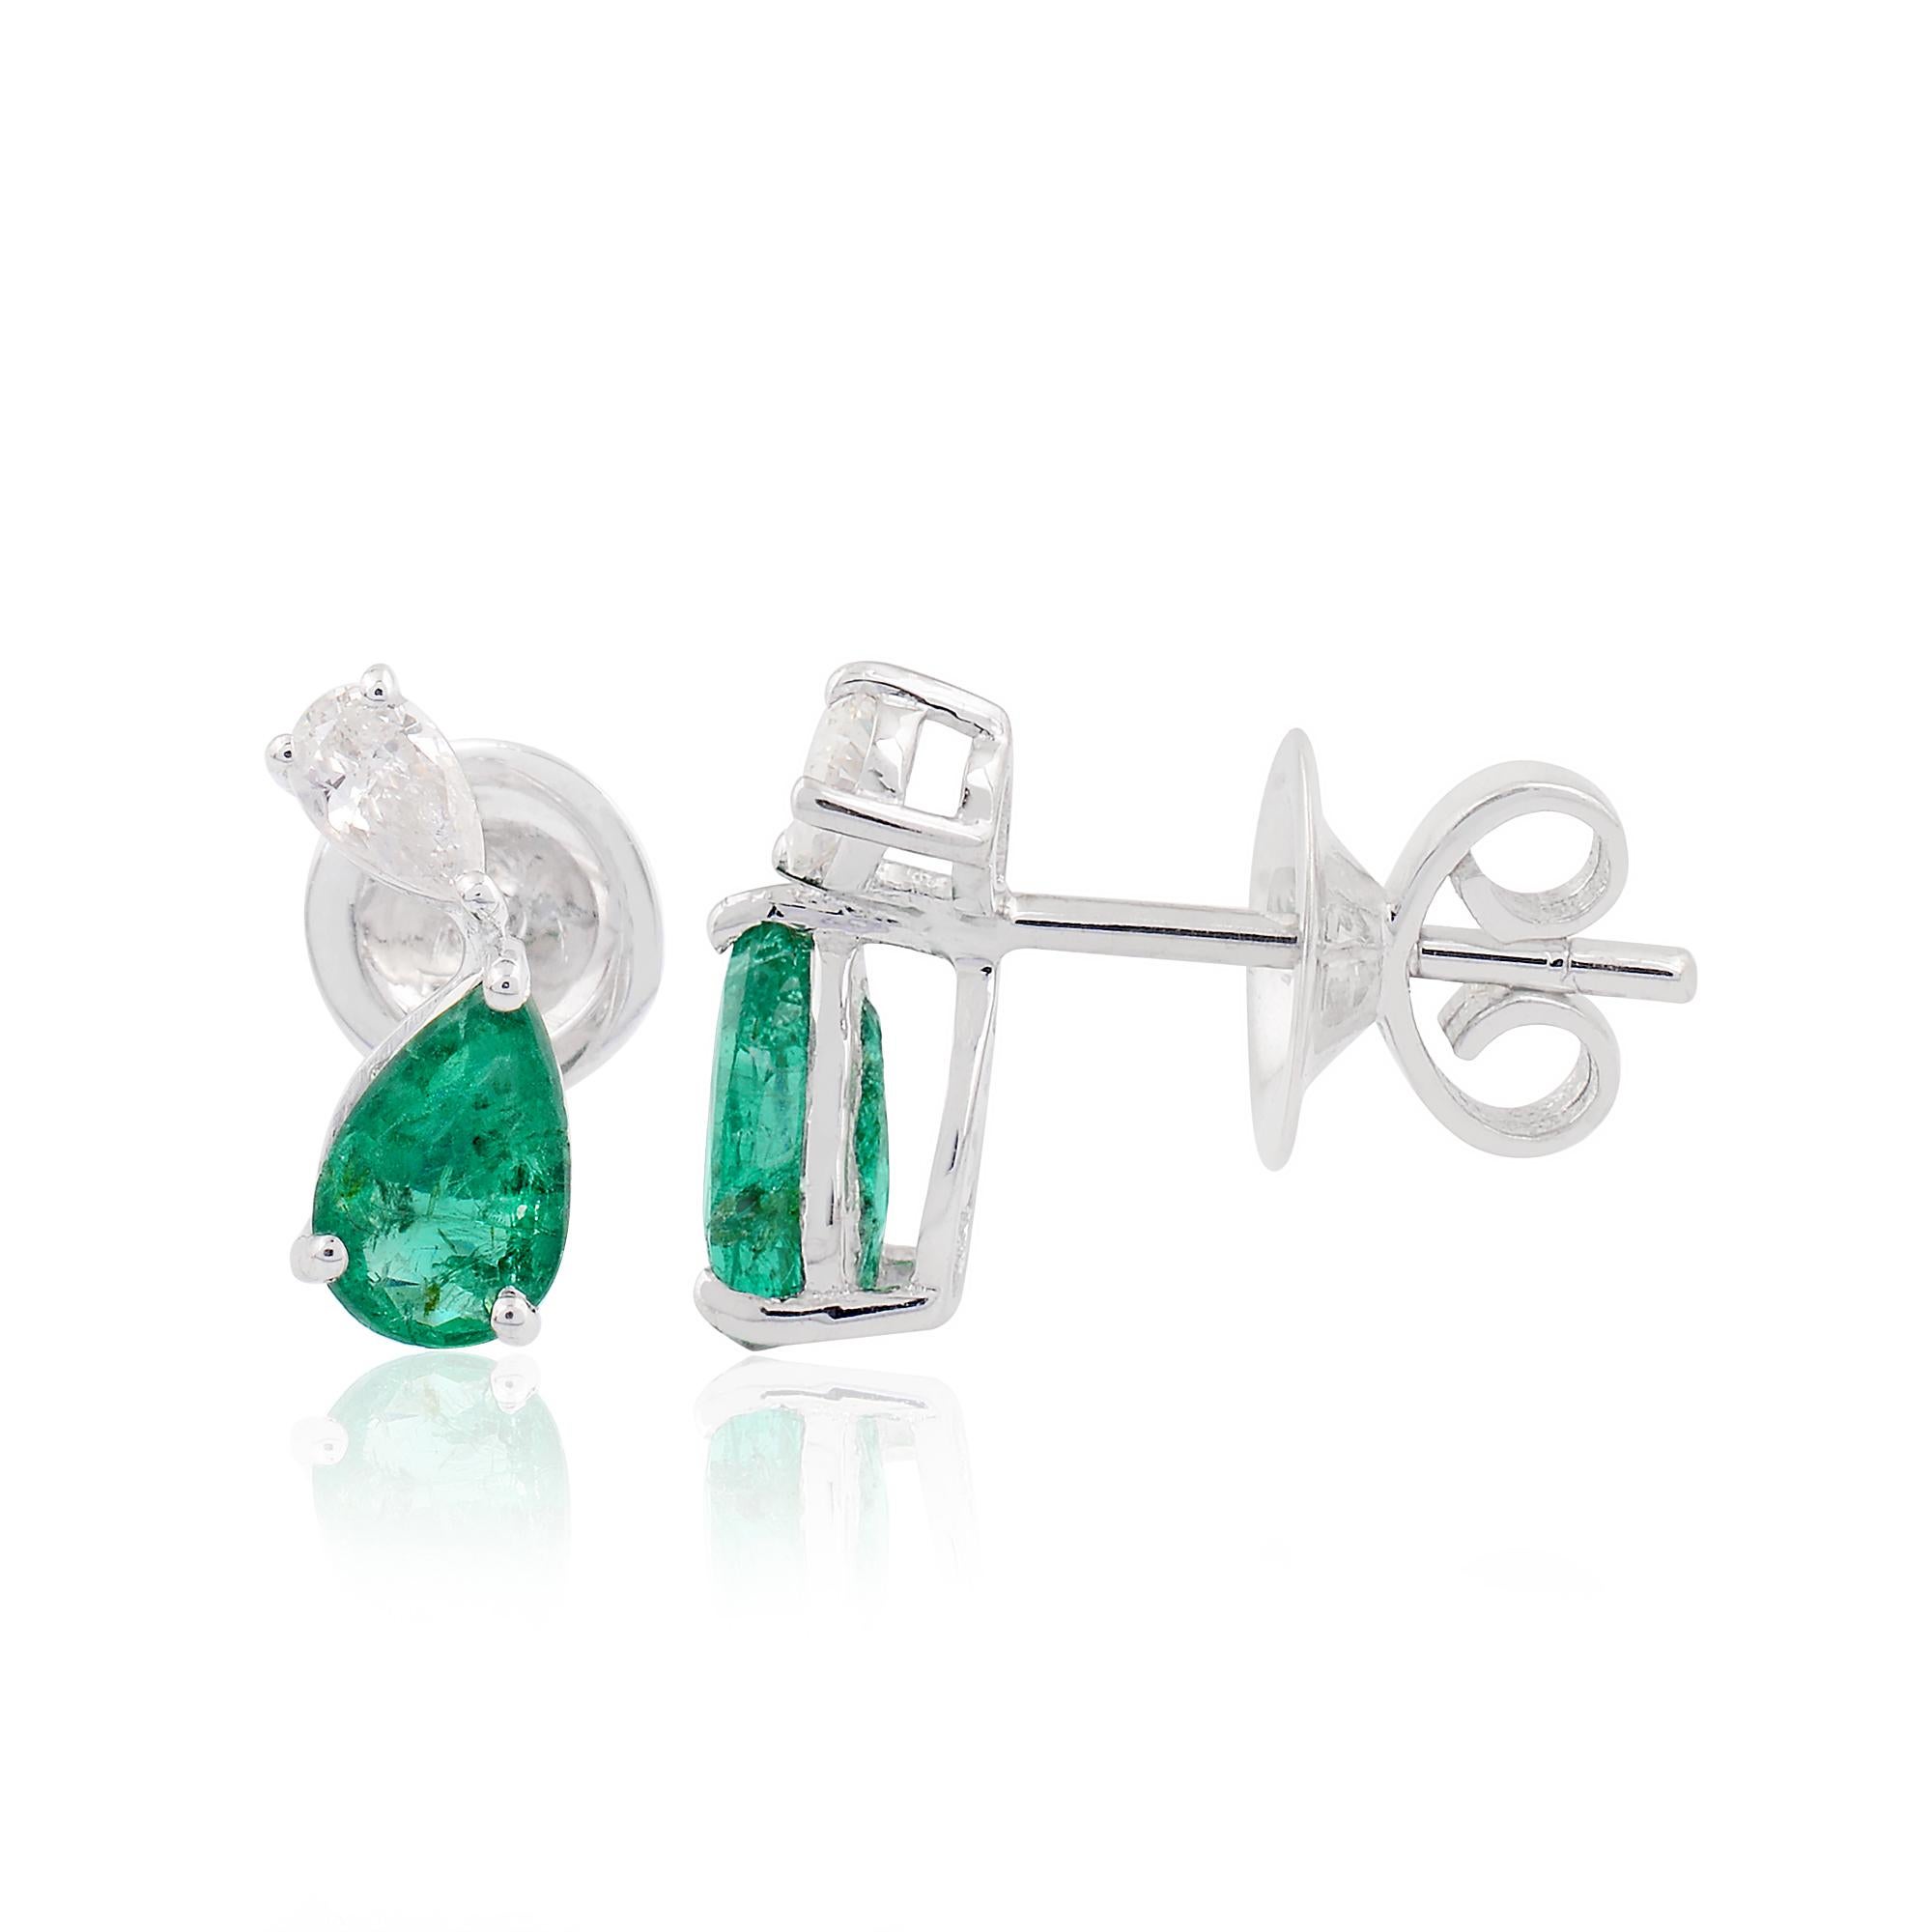 Item Code :- SEE-1259C
Gross Wt :- 2.21 gm
18k White Gold Wt :- 1.89 gm
Diamond Wt :- 0.28 carat ( AVERAGE DIAMOND CLARITY SI1-SI2 & COLOR H-I )
Emerald Wt :- 1.30 carat
Earrings Size :- 13 mm approx.

✦ Sizing
.....................
We can adjust